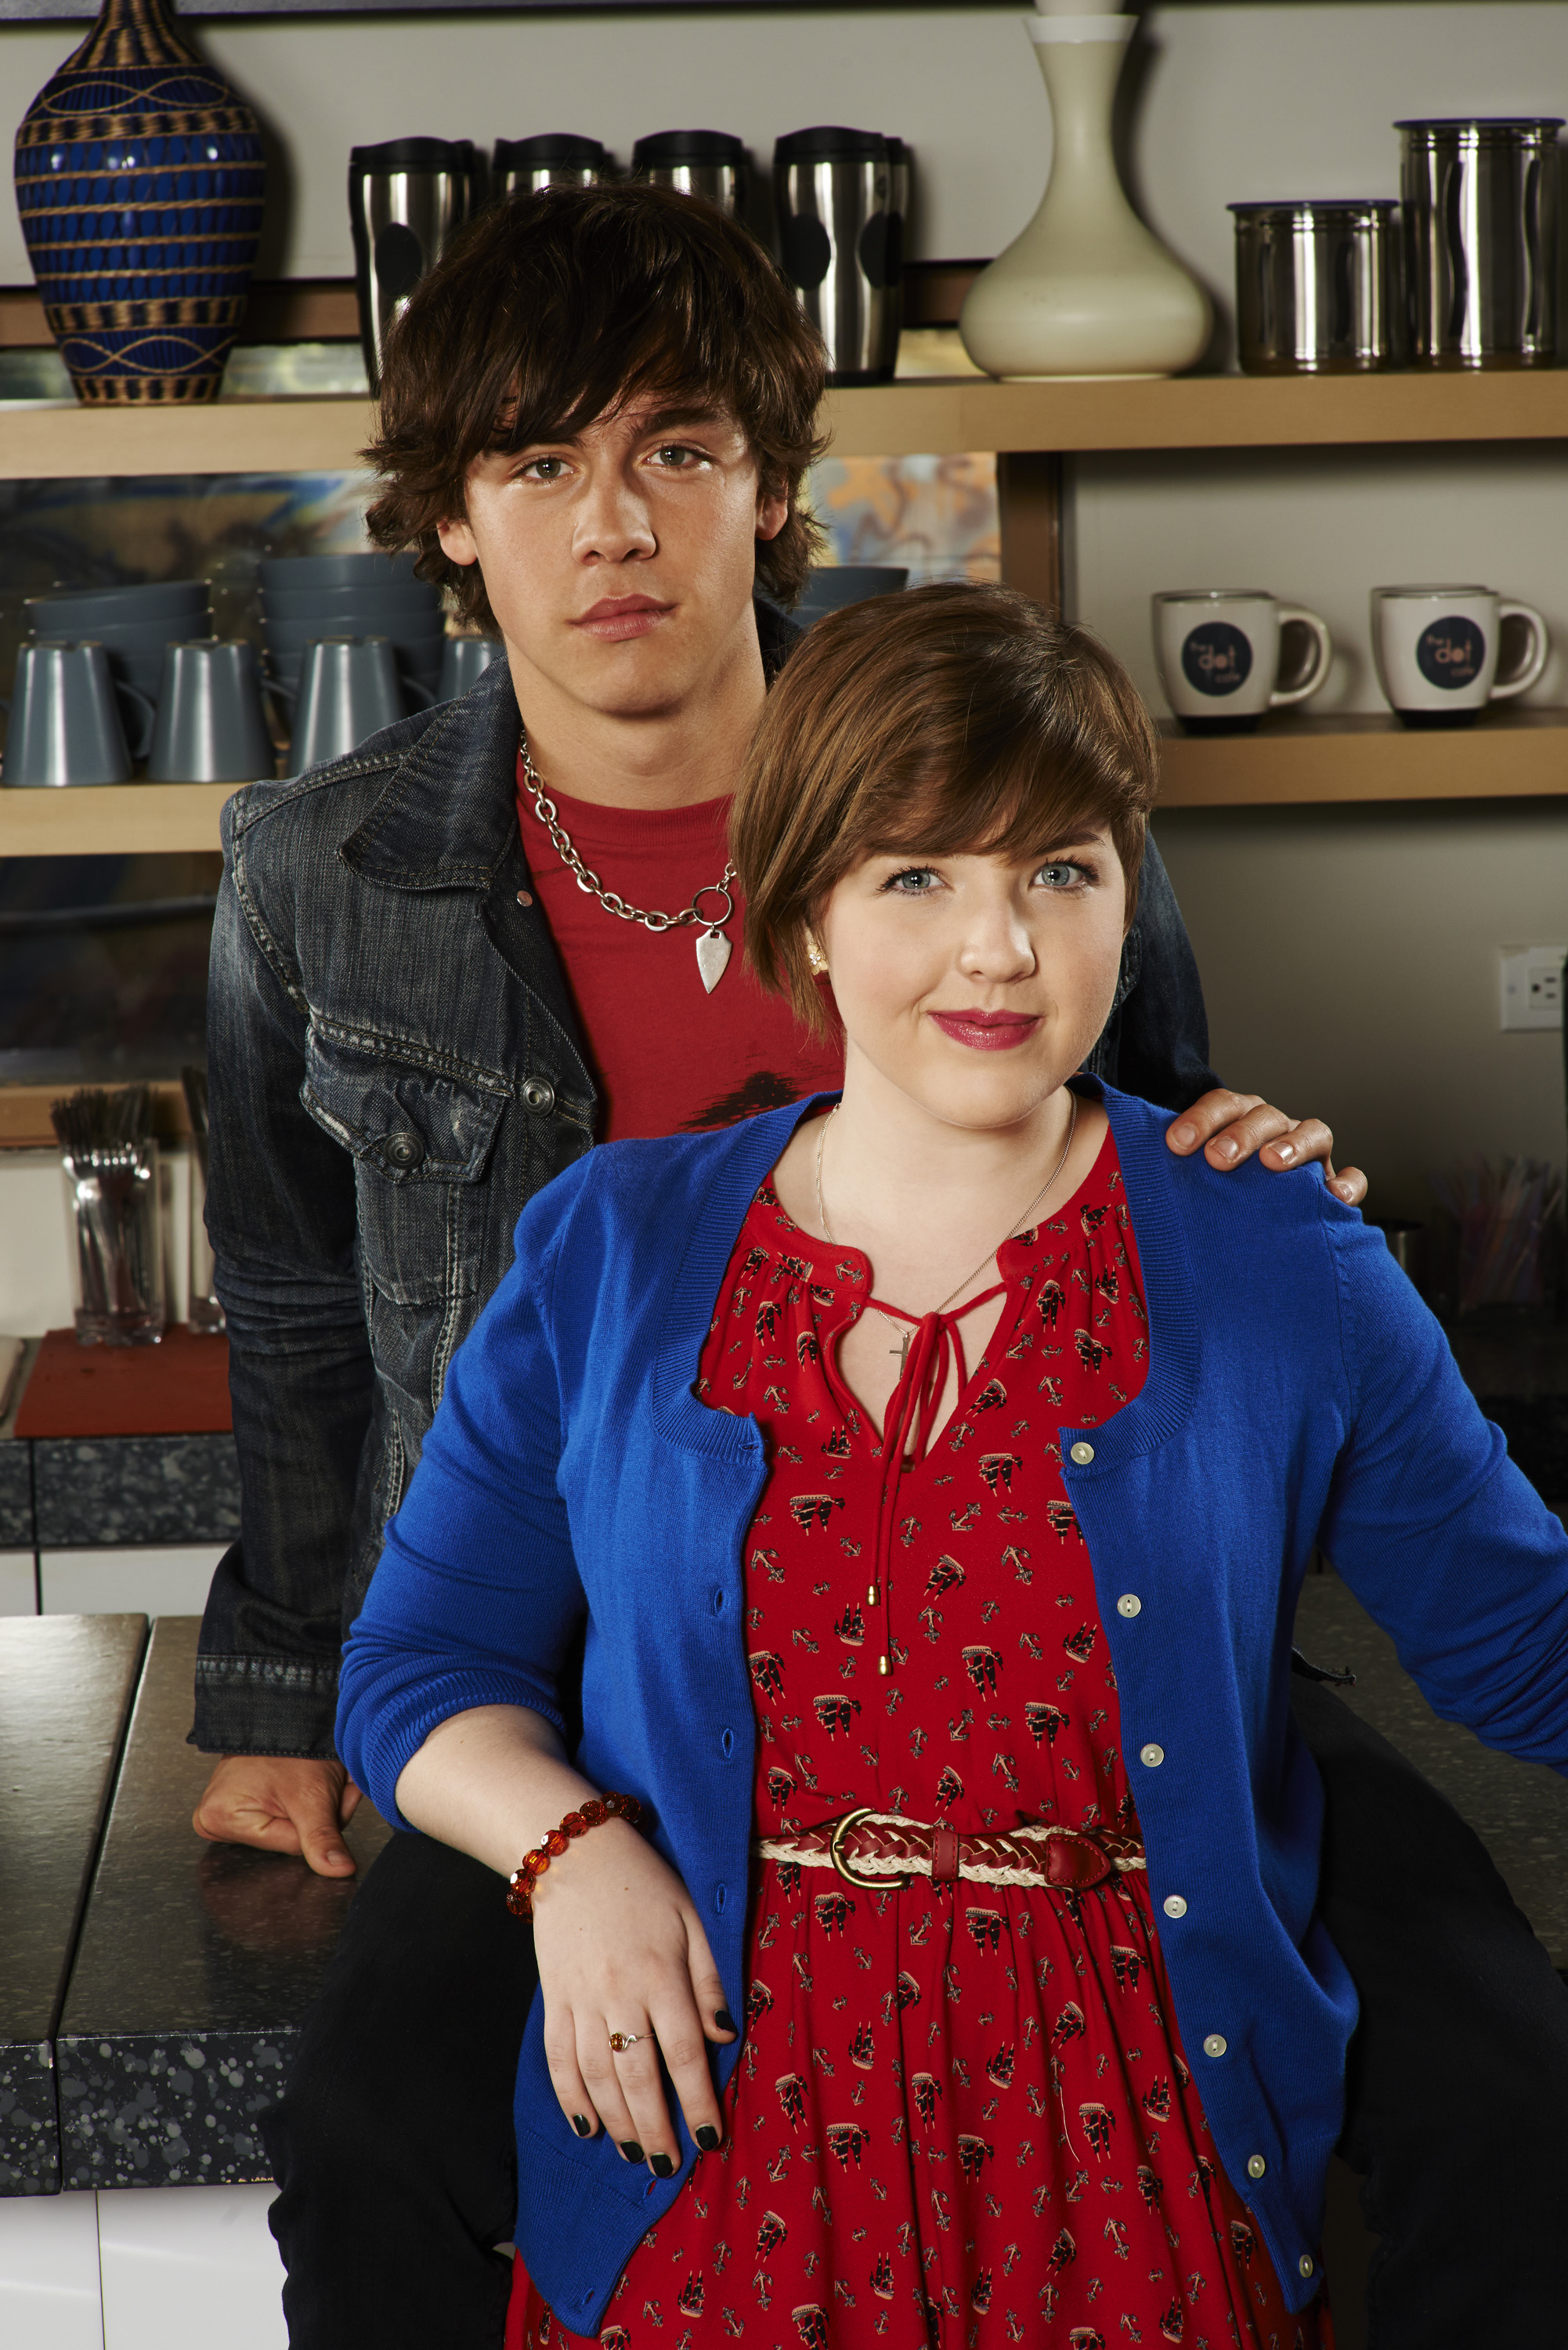 Pictured: Eli Goldsworthy (Munro Chambers) and Clare Edwards (Aislinn Paul)...